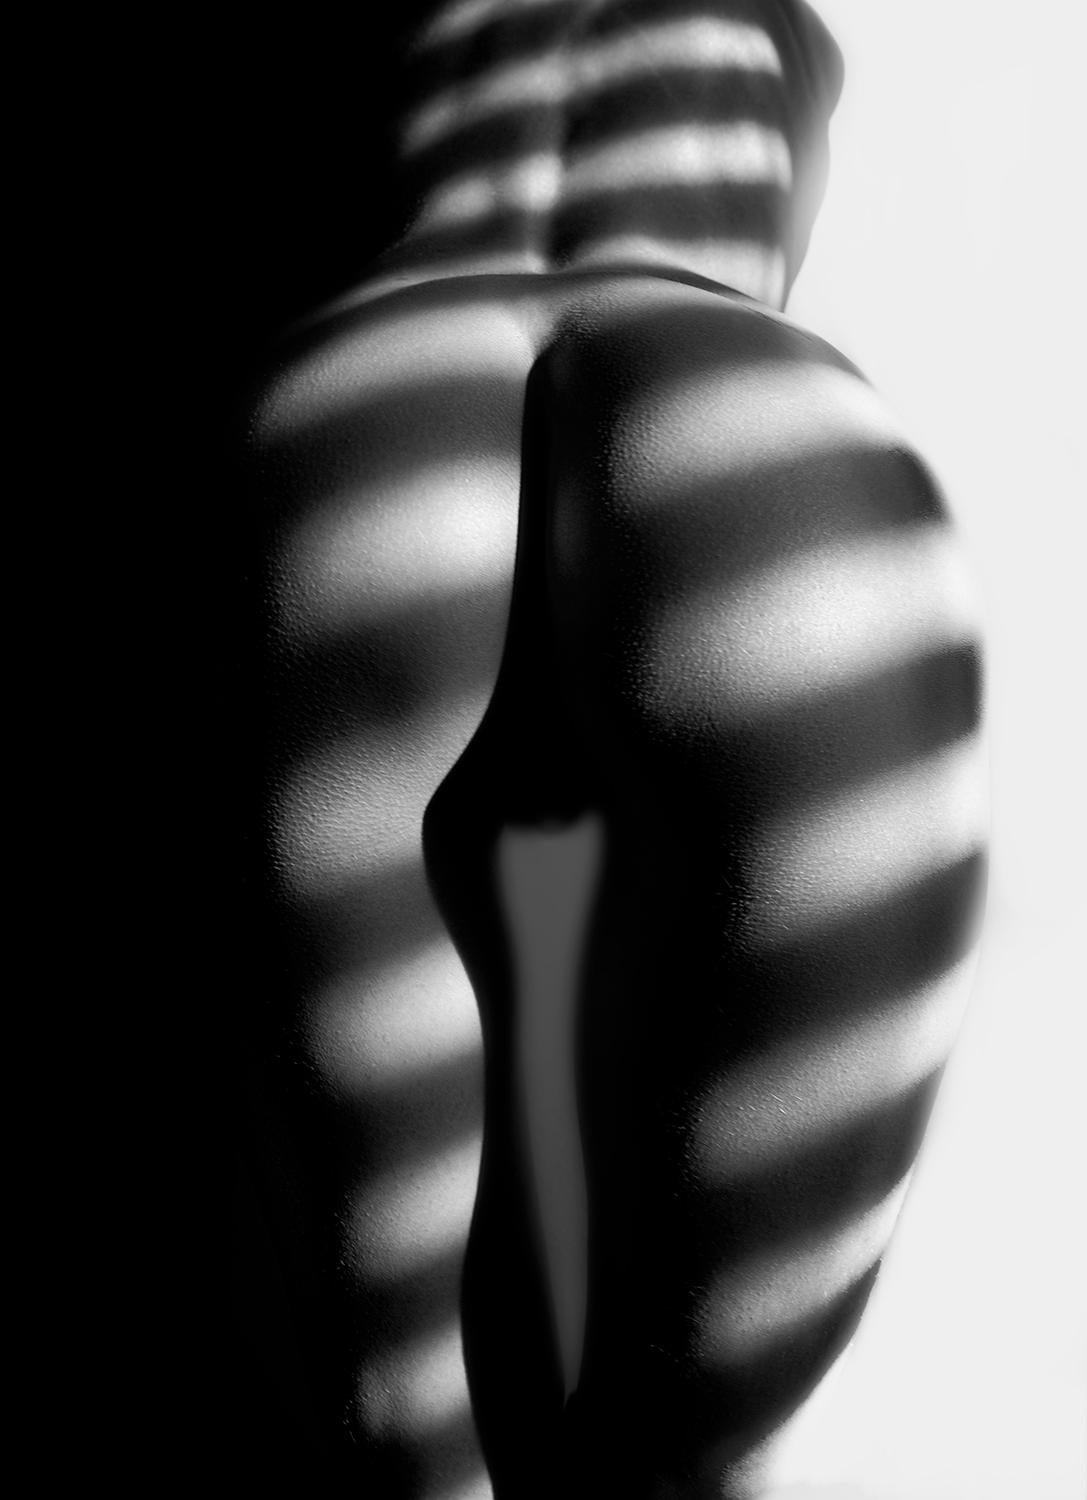 Real Coco de Mer
Edition of 25
signed and numbered by the artist

JJK shows his perfect play with light and shadow in this intimate photograph.
The shape of the body reminds us of the Coco de Mer Nut from the Seychelles.

JJK is a pseudonym for one